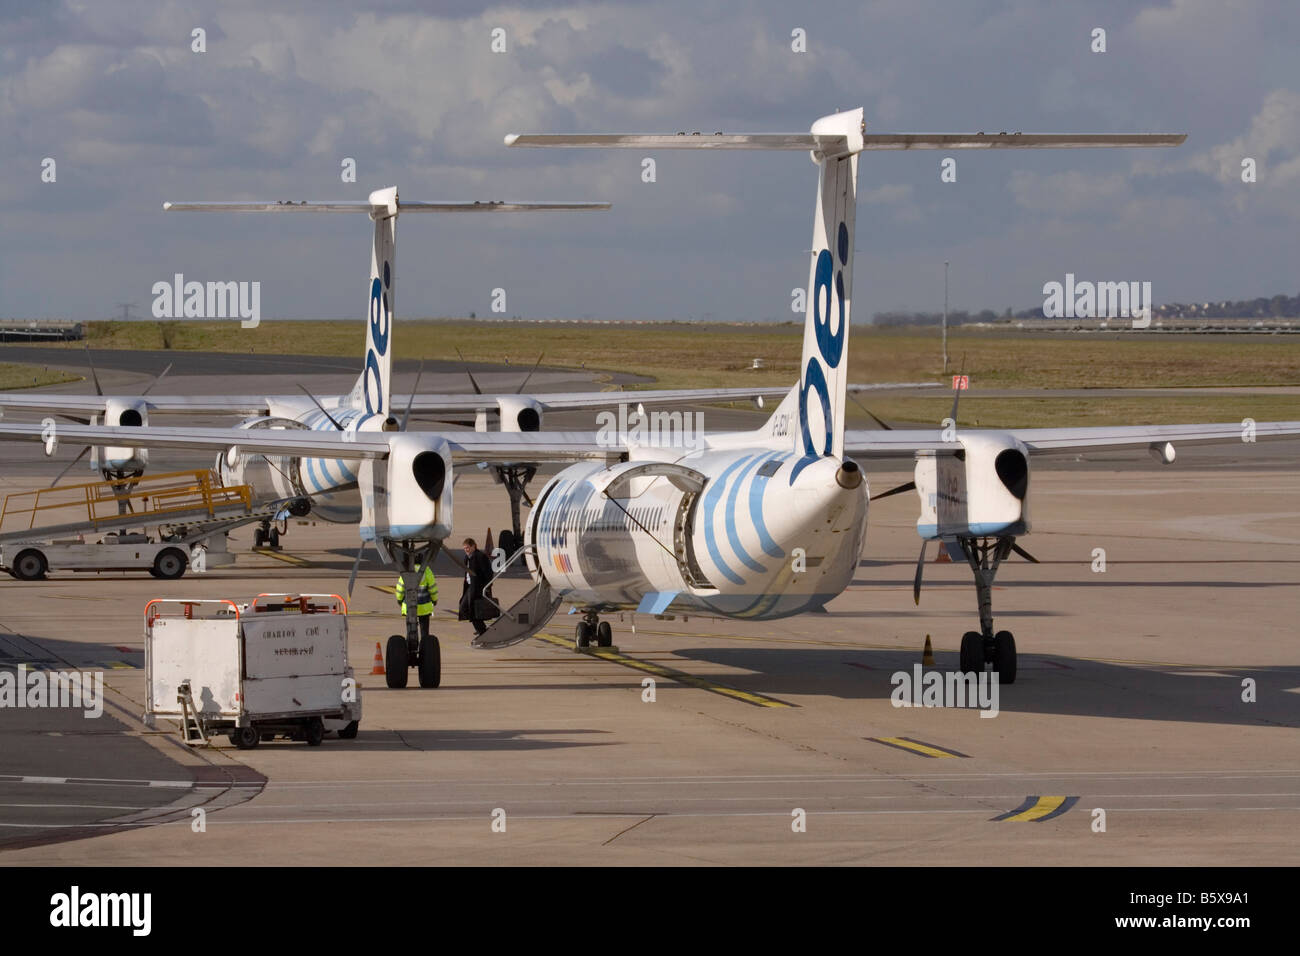 Bombardier Dash 8-Q400 short haul airliners belonging to grounded British regional airline Flybe on the ground at Paris Charles de Gaulle airport. Stock Photo